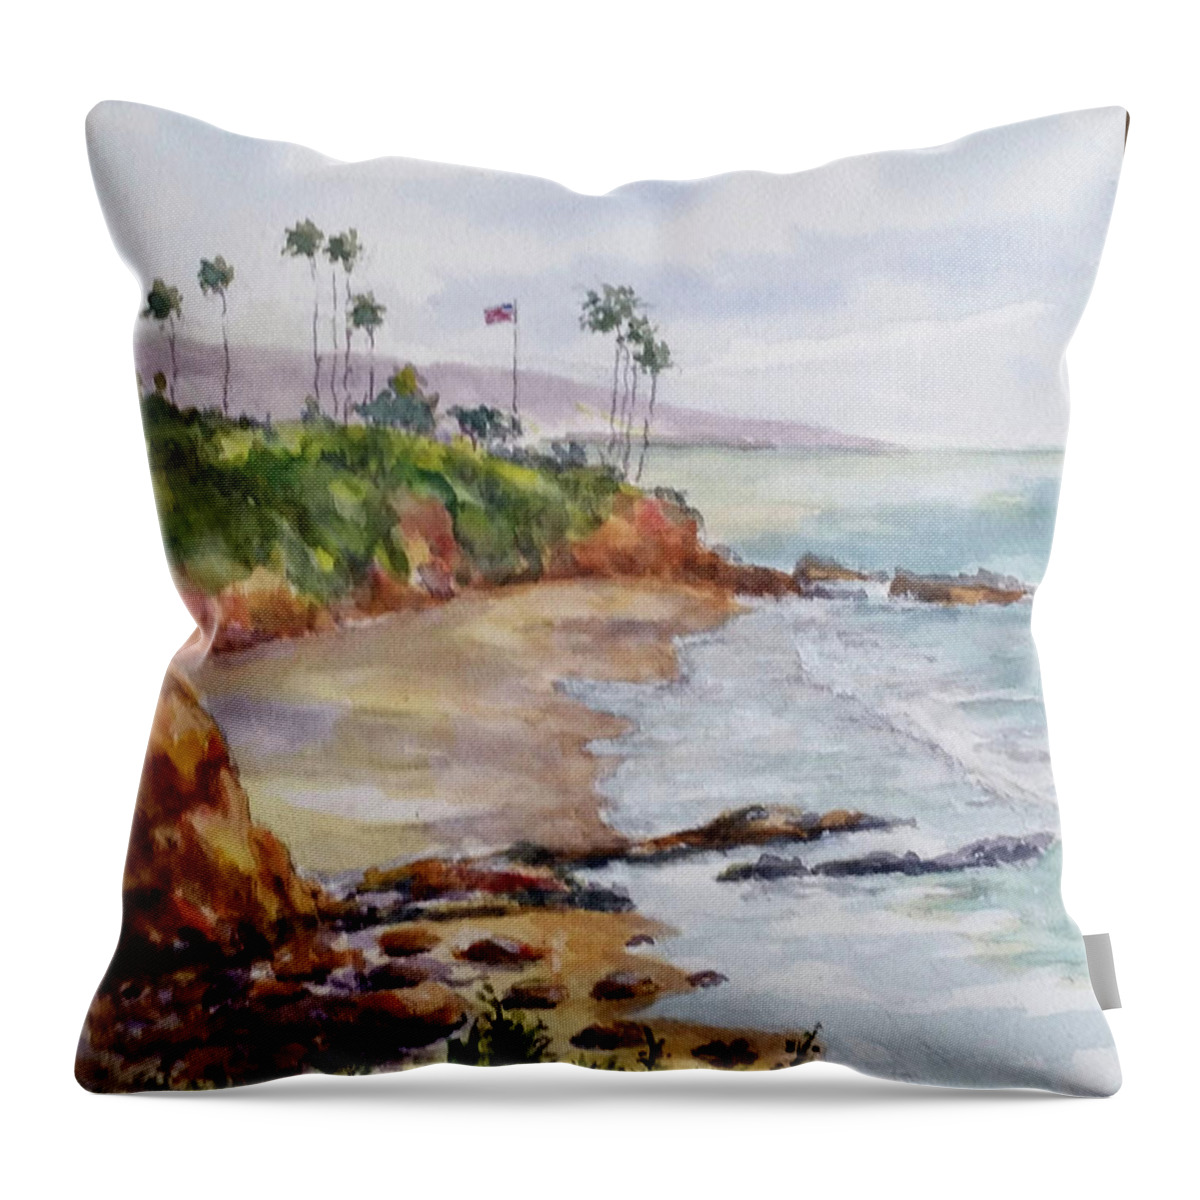 Landscape Throw Pillow featuring the painting View From The Cliff by William Reed